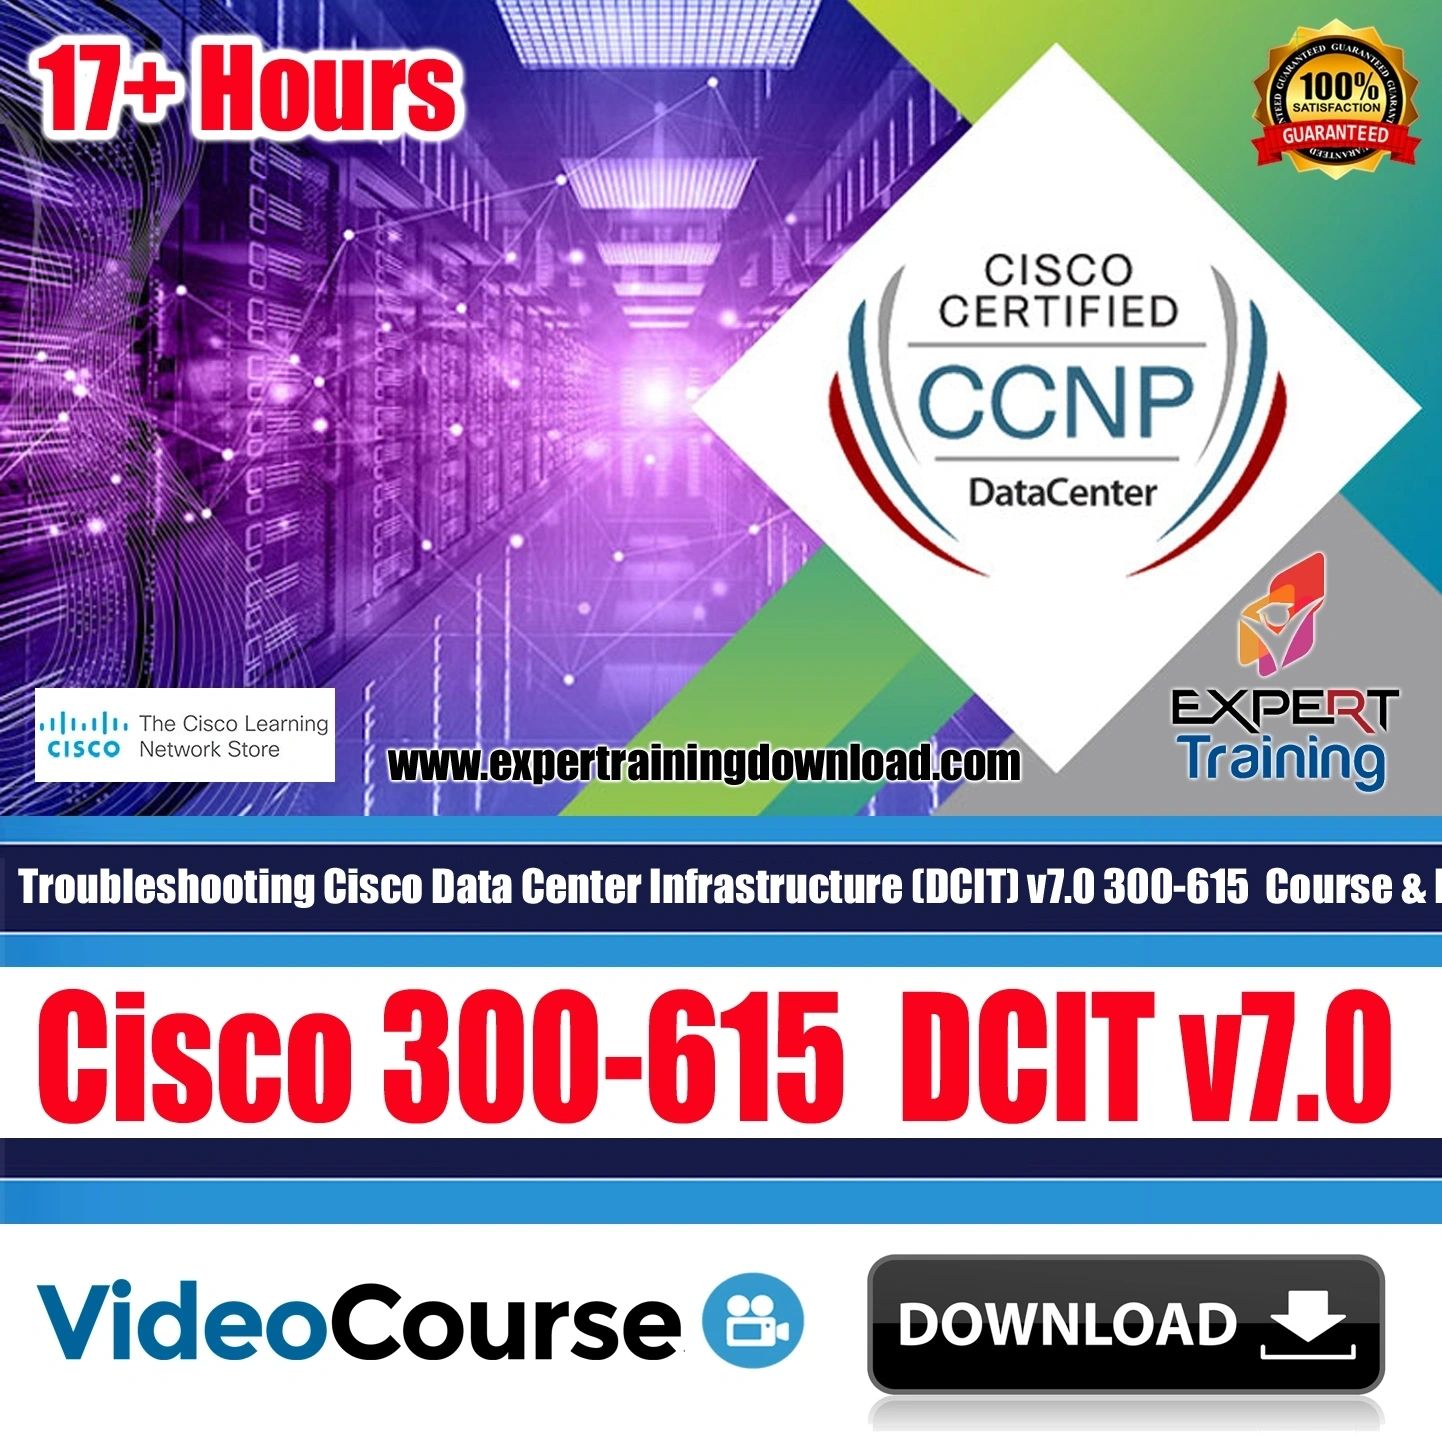 Troubleshooting Cisco Data Center Infrastructure (DCIT) v7.0 300-615 Course